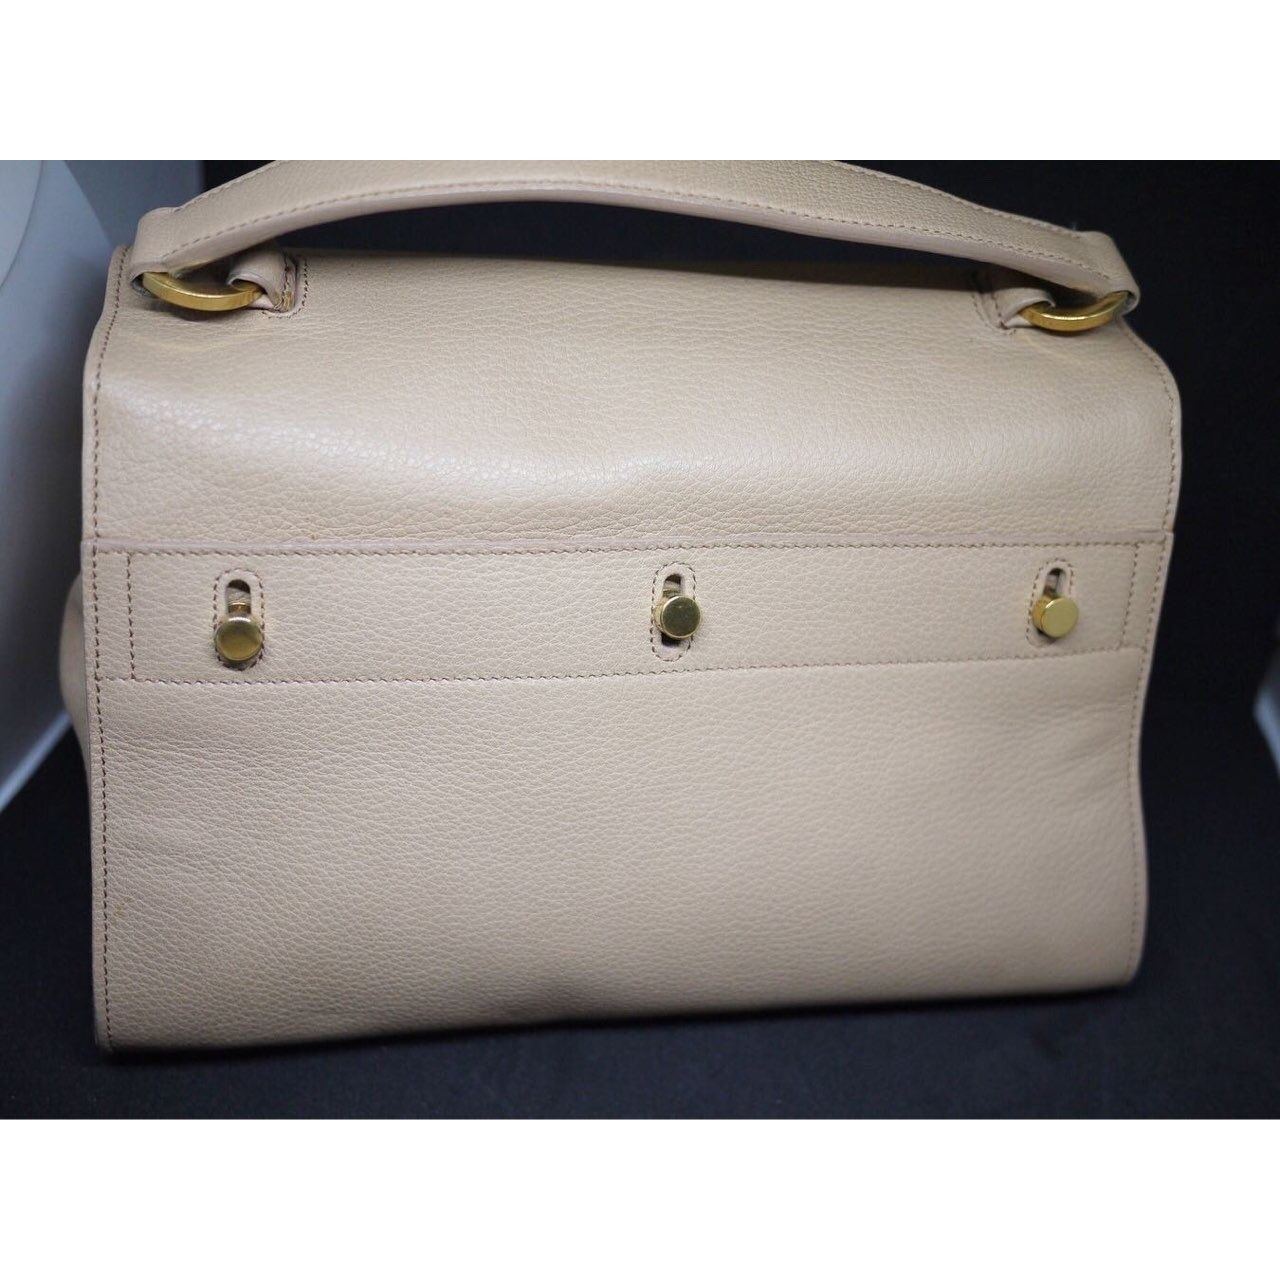 Yves Saint Laurent Muse Small Cream Leather GHW Sling Bag